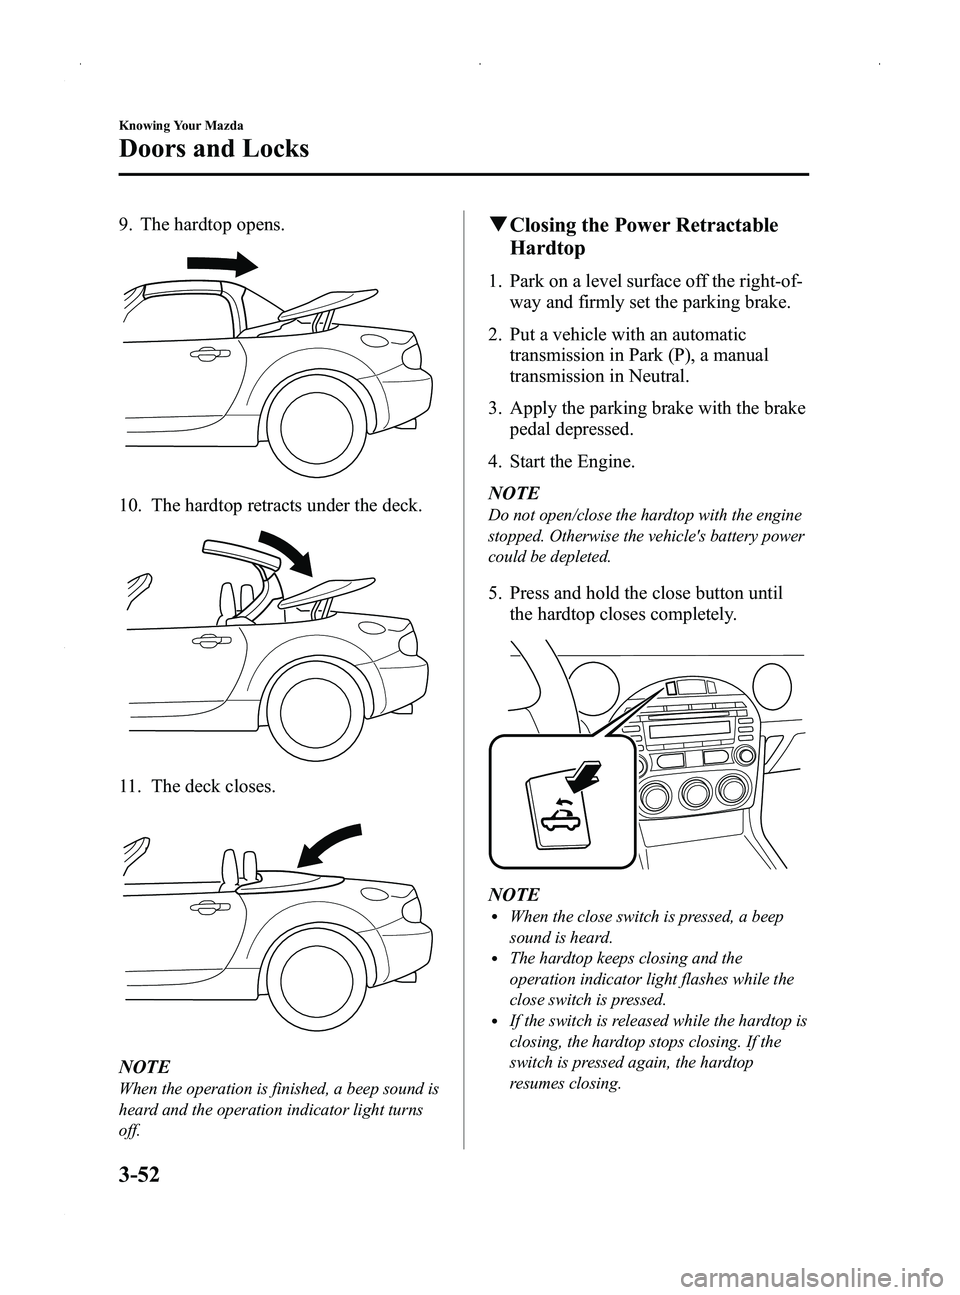 MAZDA MODEL MX-5 MIATA PRHT 2014 User Guide Black plate (106,1)
9. The hardtop opens.
10. The hardtop retracts under the deck.
11. The deck closes.
NOTE
When the operation is finished, a beep sound is
heard and the operation indicator light tur